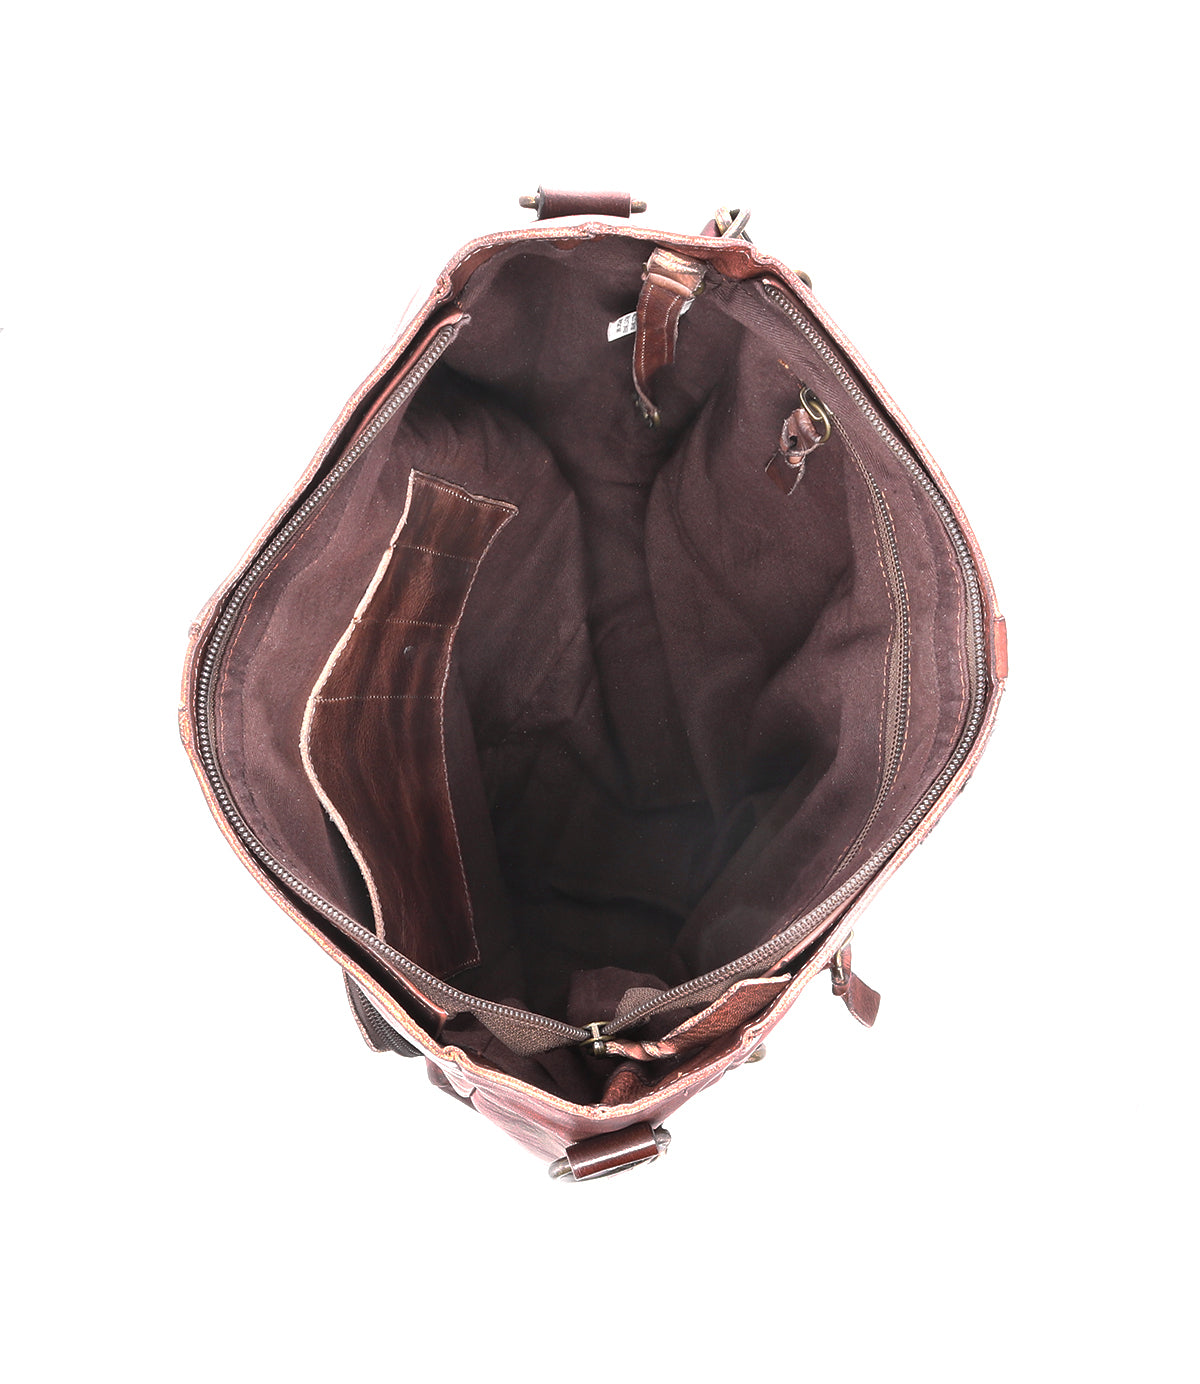 The inside of a Cirdan brown leather backpack by Bed Stu.